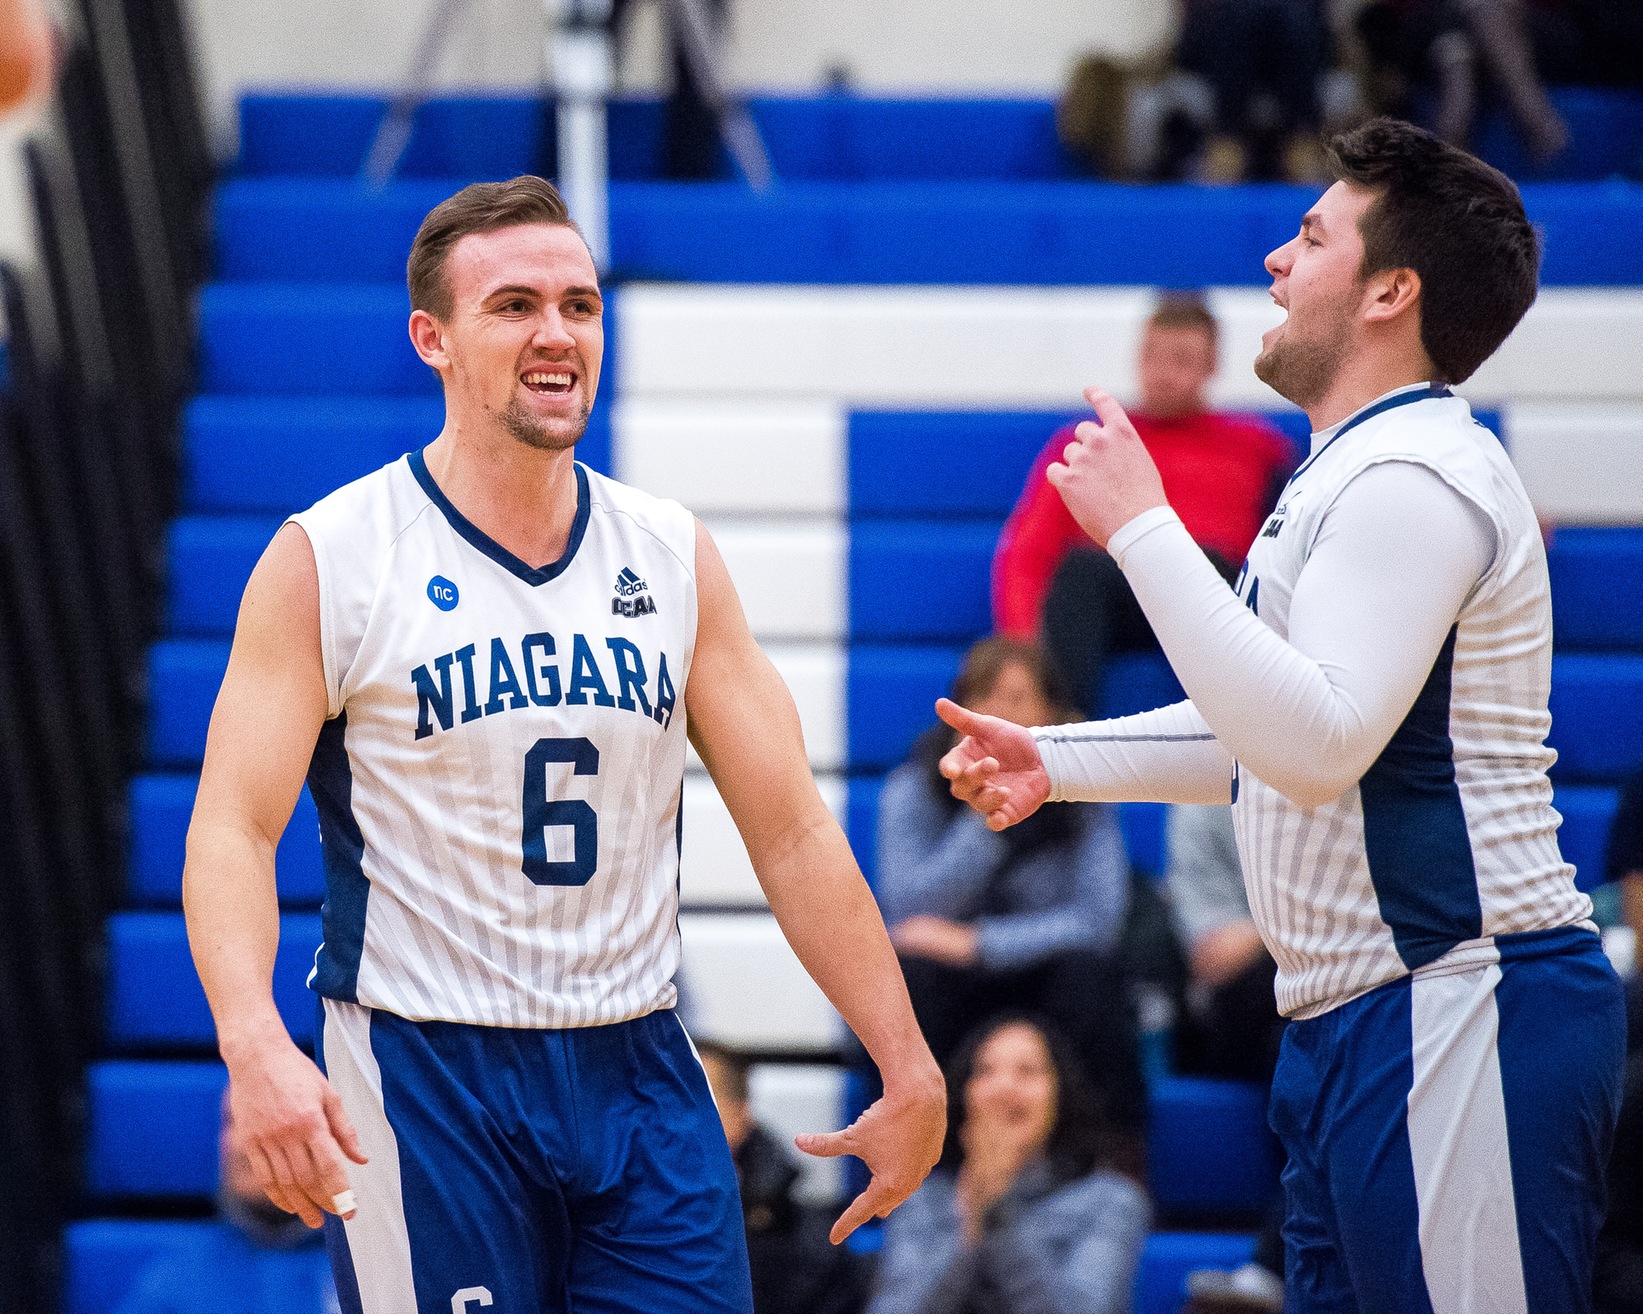 PREVIEW: Knights to open OCAA Championships against hosting Grizzlies